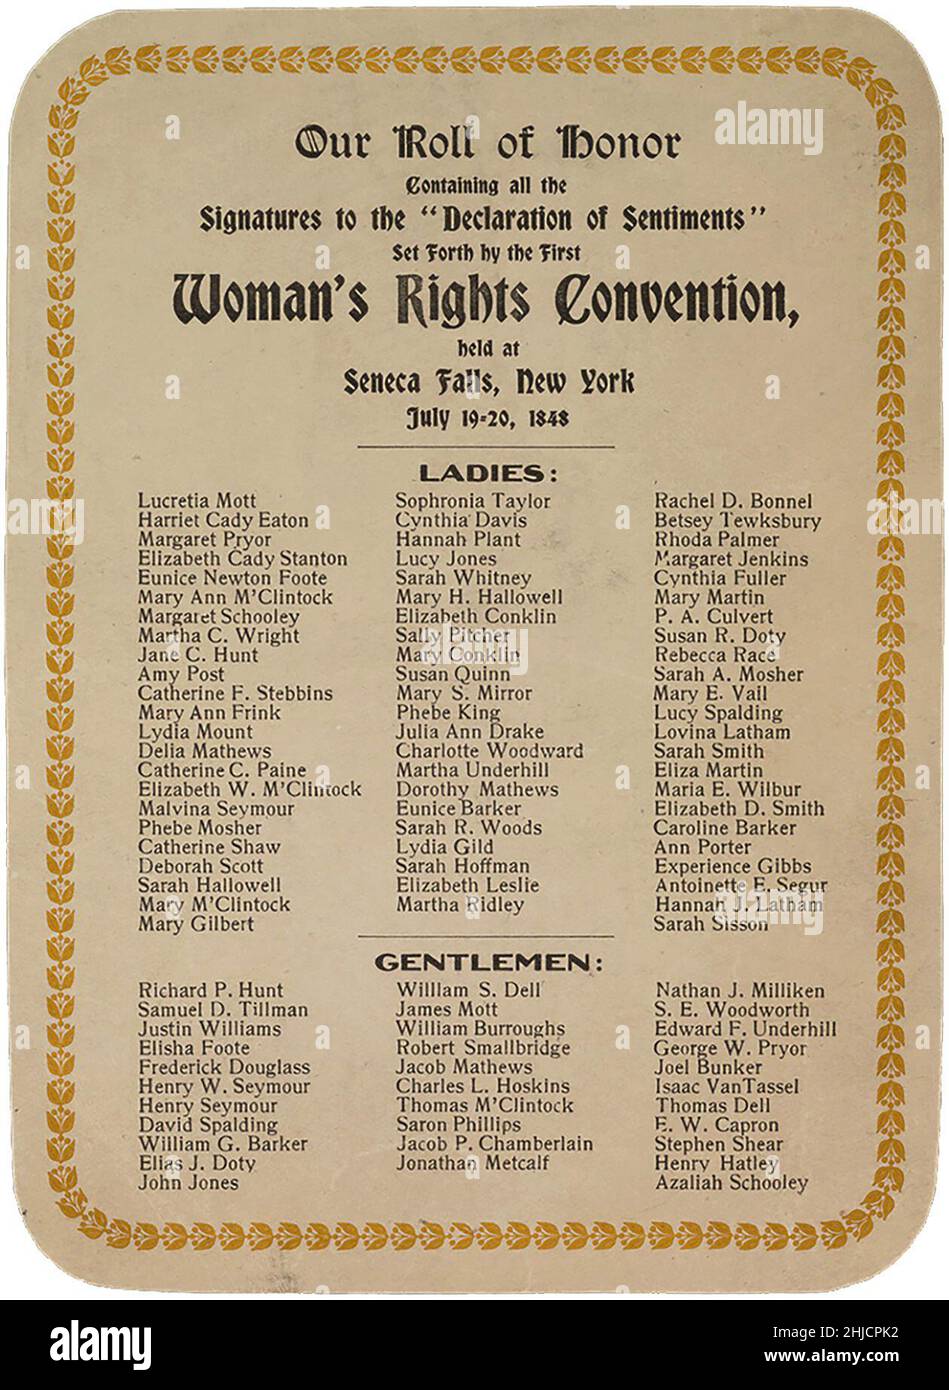 List of signatures from the Declaration of Sentiments set forth by the first Woman's Rights Convention in the United Stares, held at Seneca Falls, New York, July 19-20, 1848. Card issued in 1908 for a 50th anniversary celebration. Stock Photo